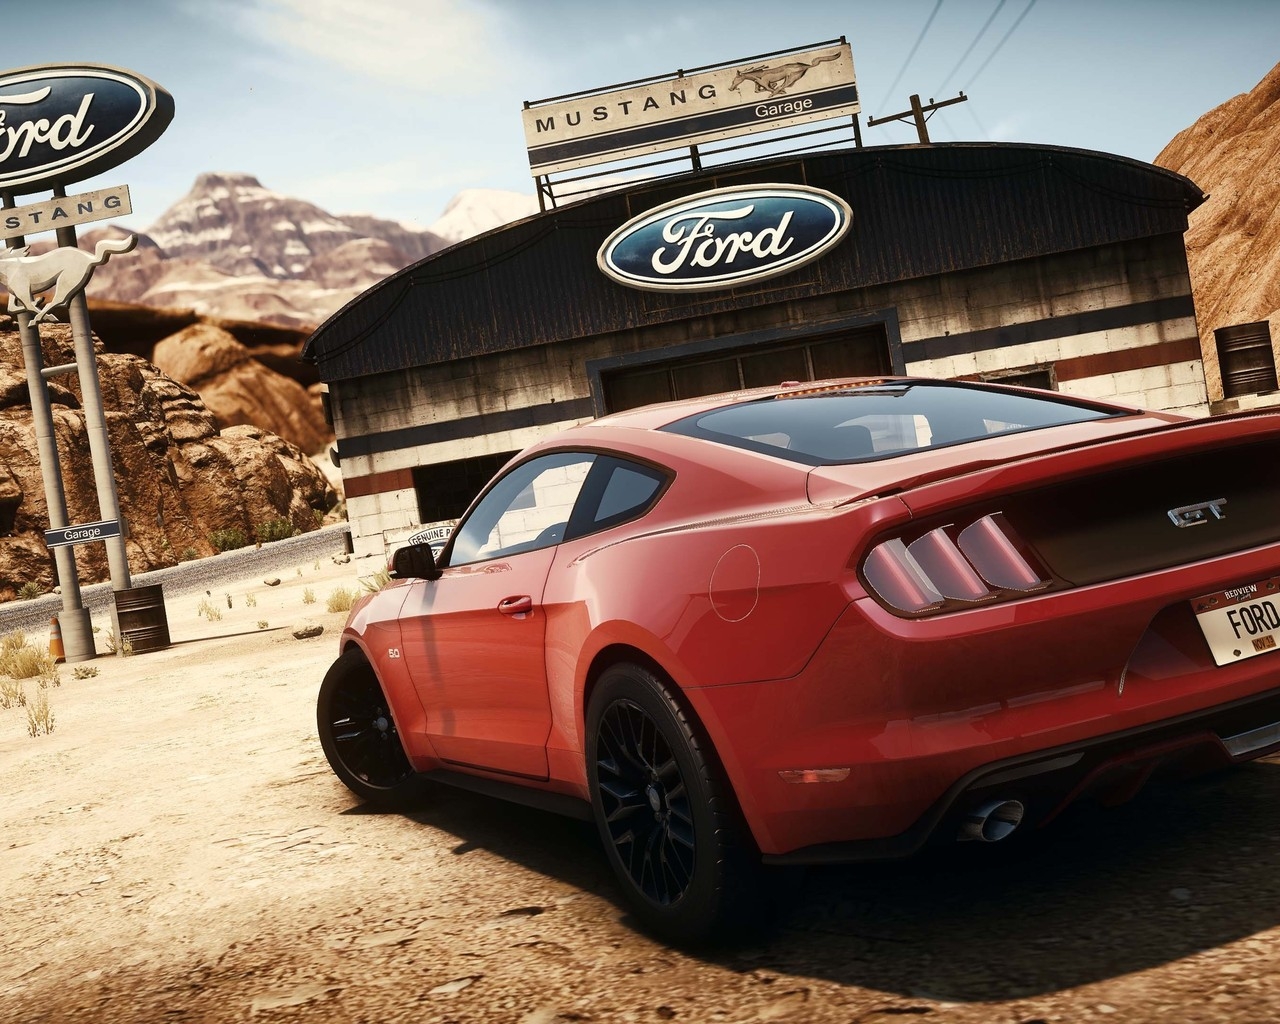 Need For Speed Ford Mustang for 1280 x 1024 resolution